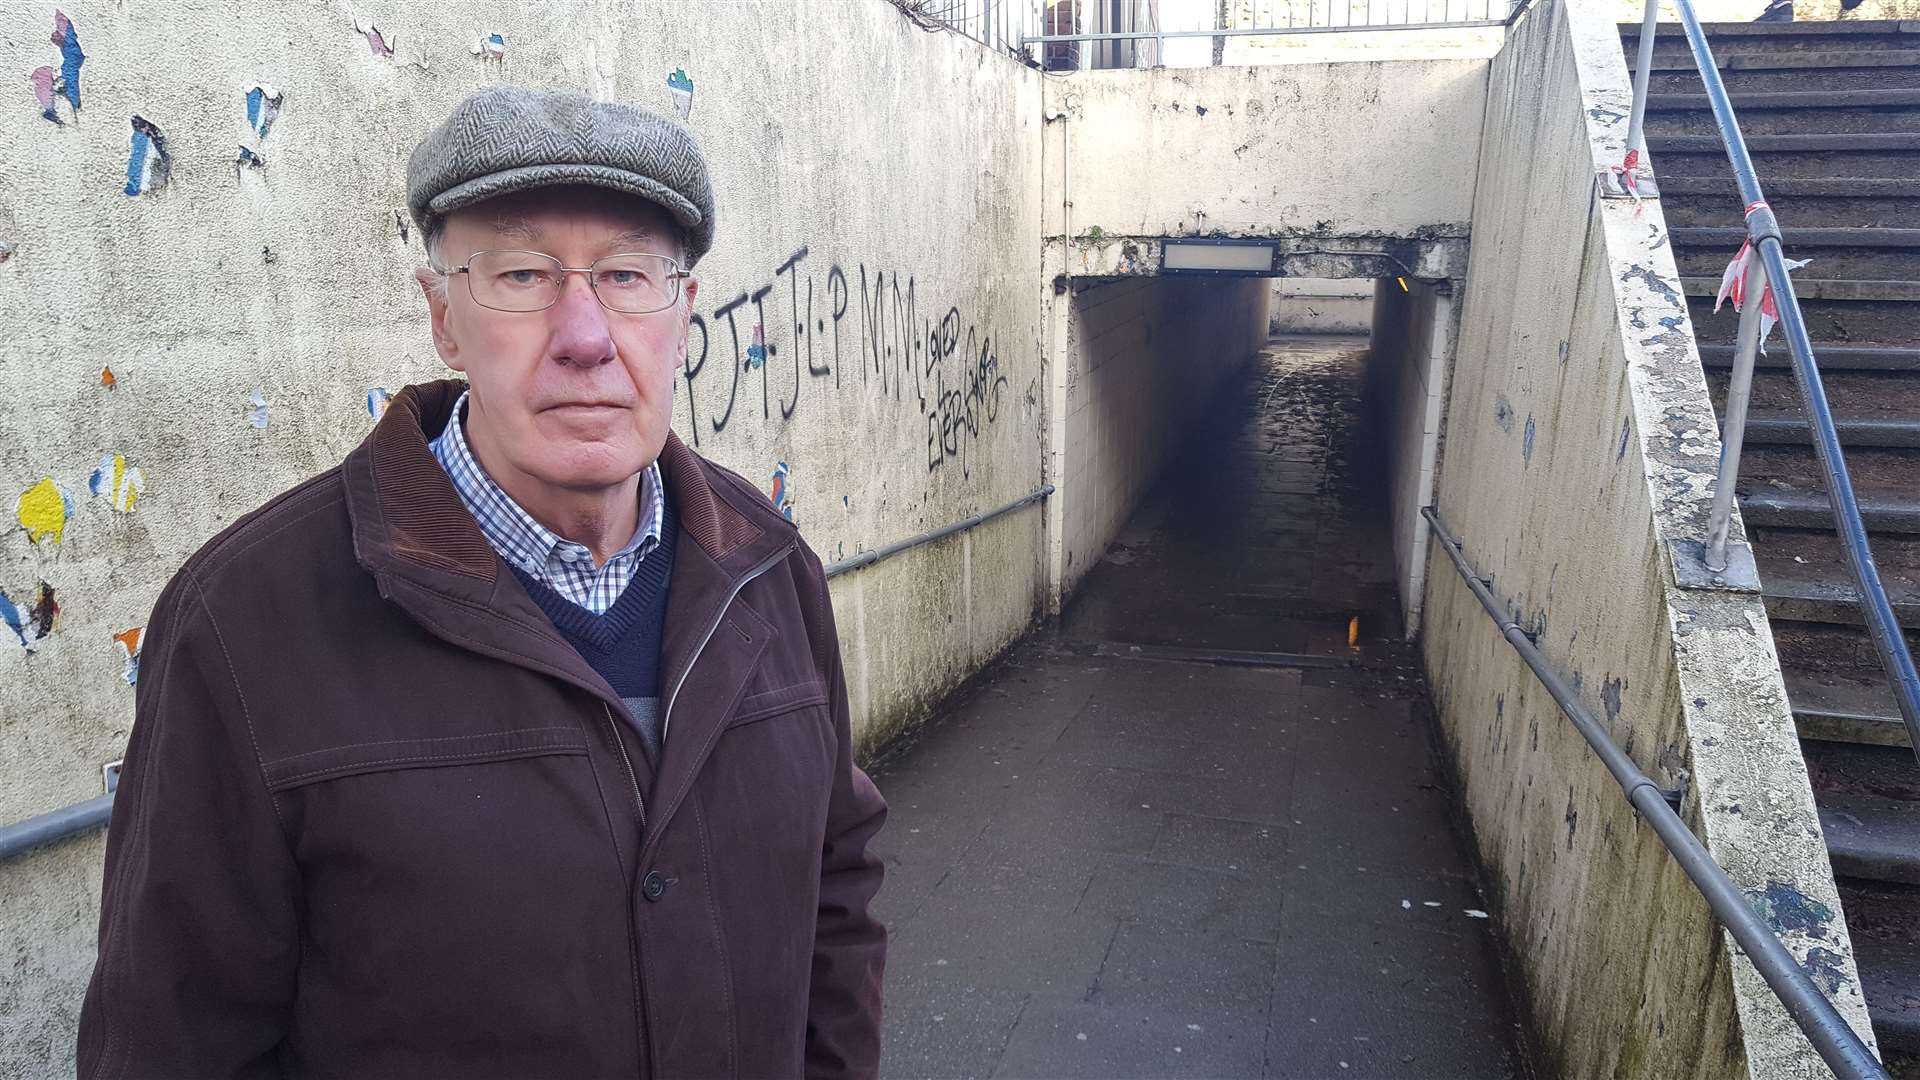 Cllr Nick Eden-Green at the rundown Wincheap underpass, which is covered in graffiti